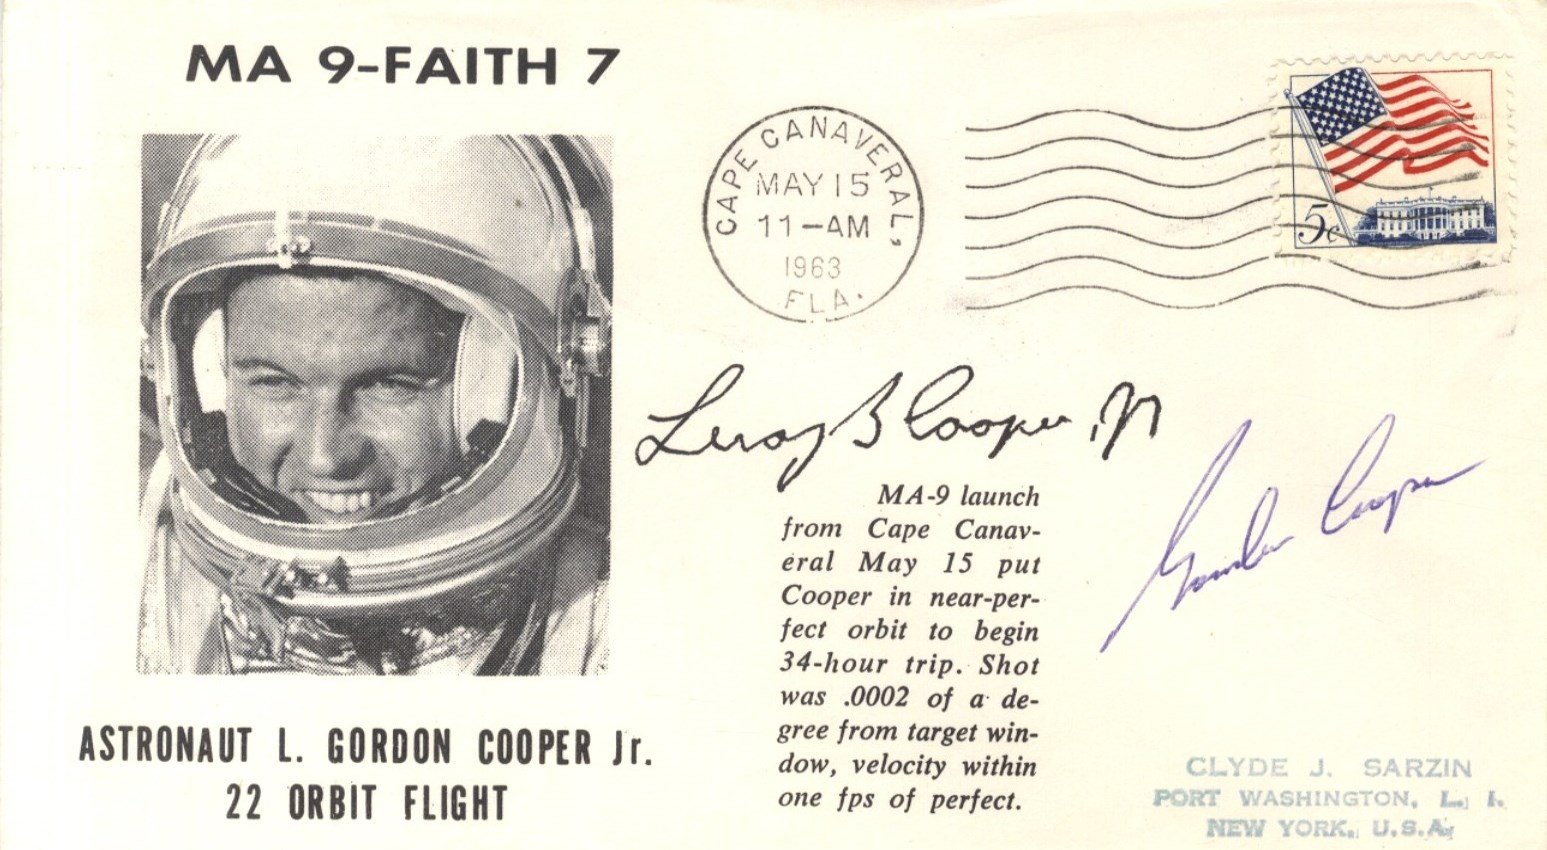 MERCURY SEVEN: Selection of individually signed Commemorative Covers by various members of the - Image 3 of 6